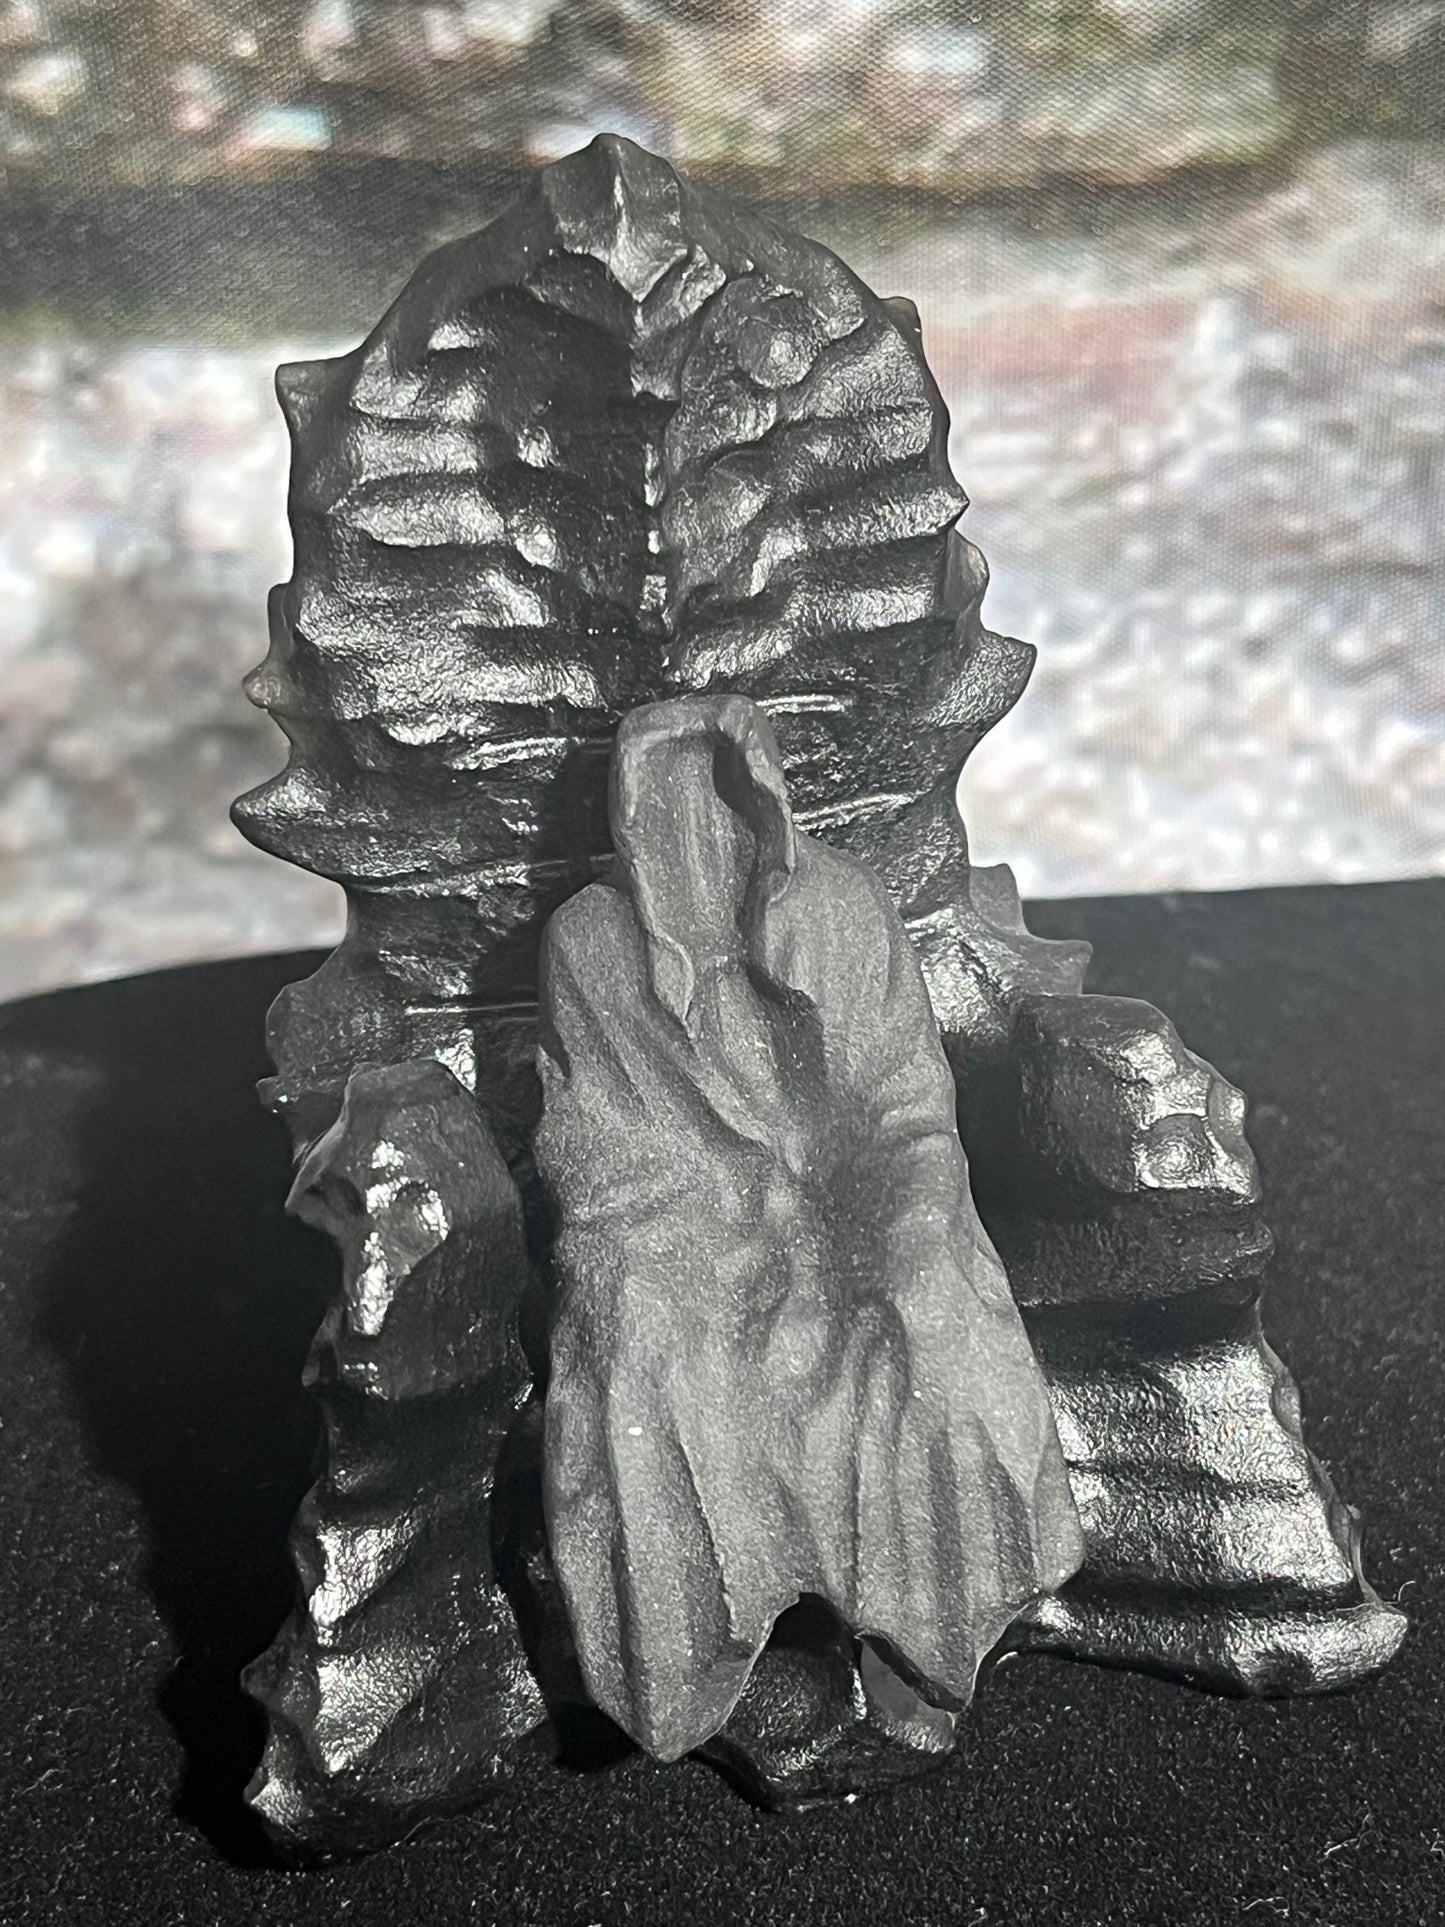 Grim reaper sitting on throne stone/crystal carving